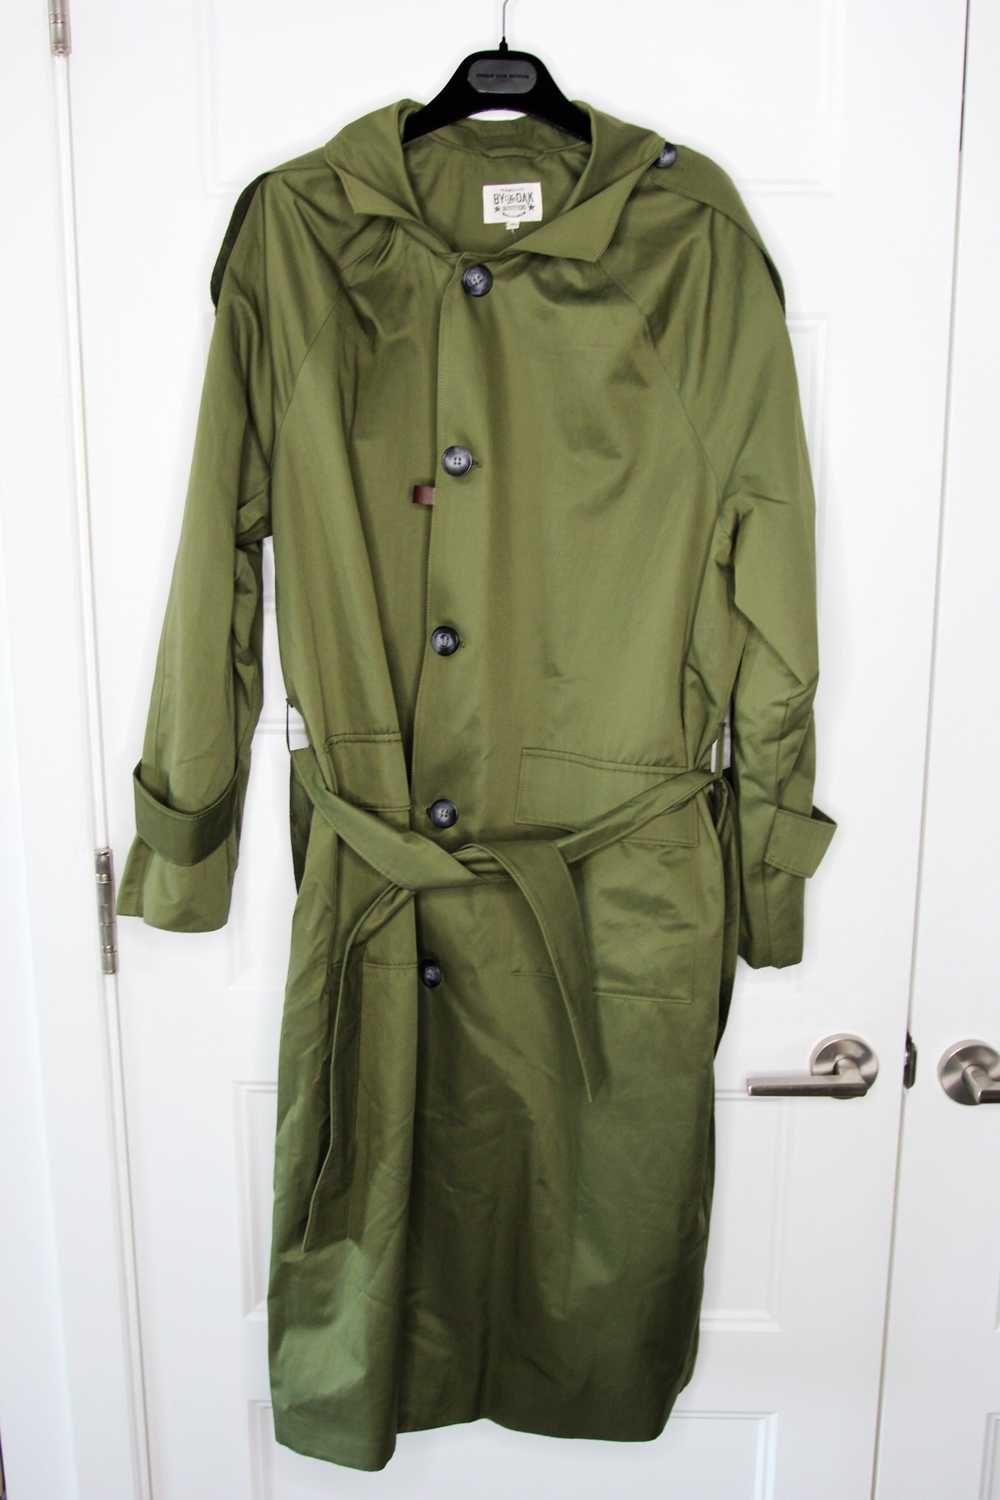 BNWT SS23 BY THE OAK BELTED LONG TRENCH COAT XL - image 2